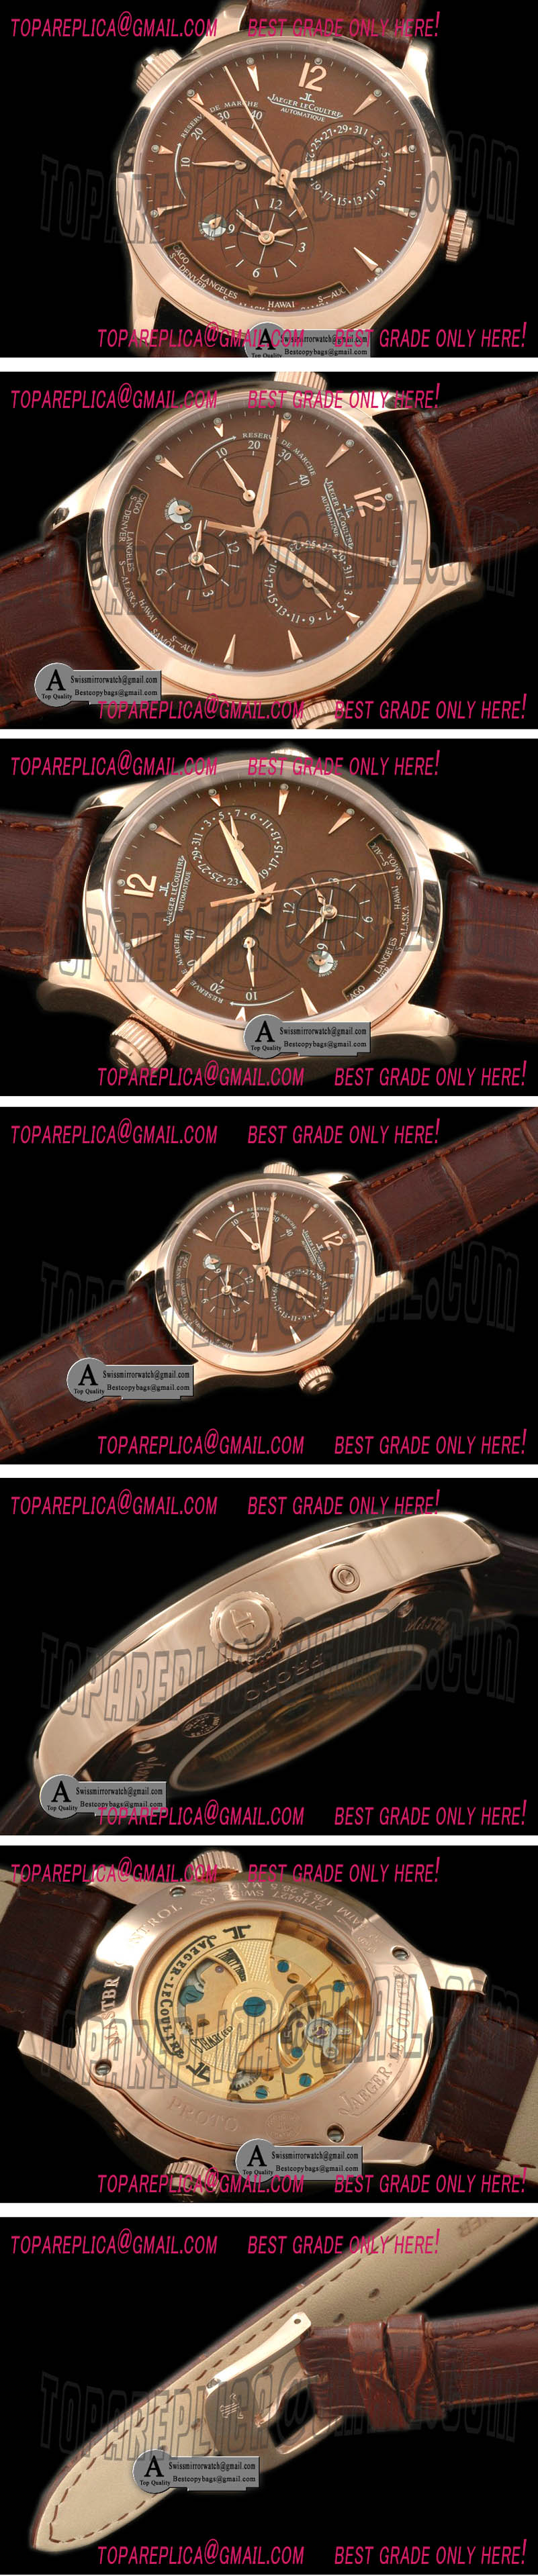 Jaeger-LeCoultre Master Reserve/Duo Time Rose Gold/Leather Brown Asian 23J Replica Watches